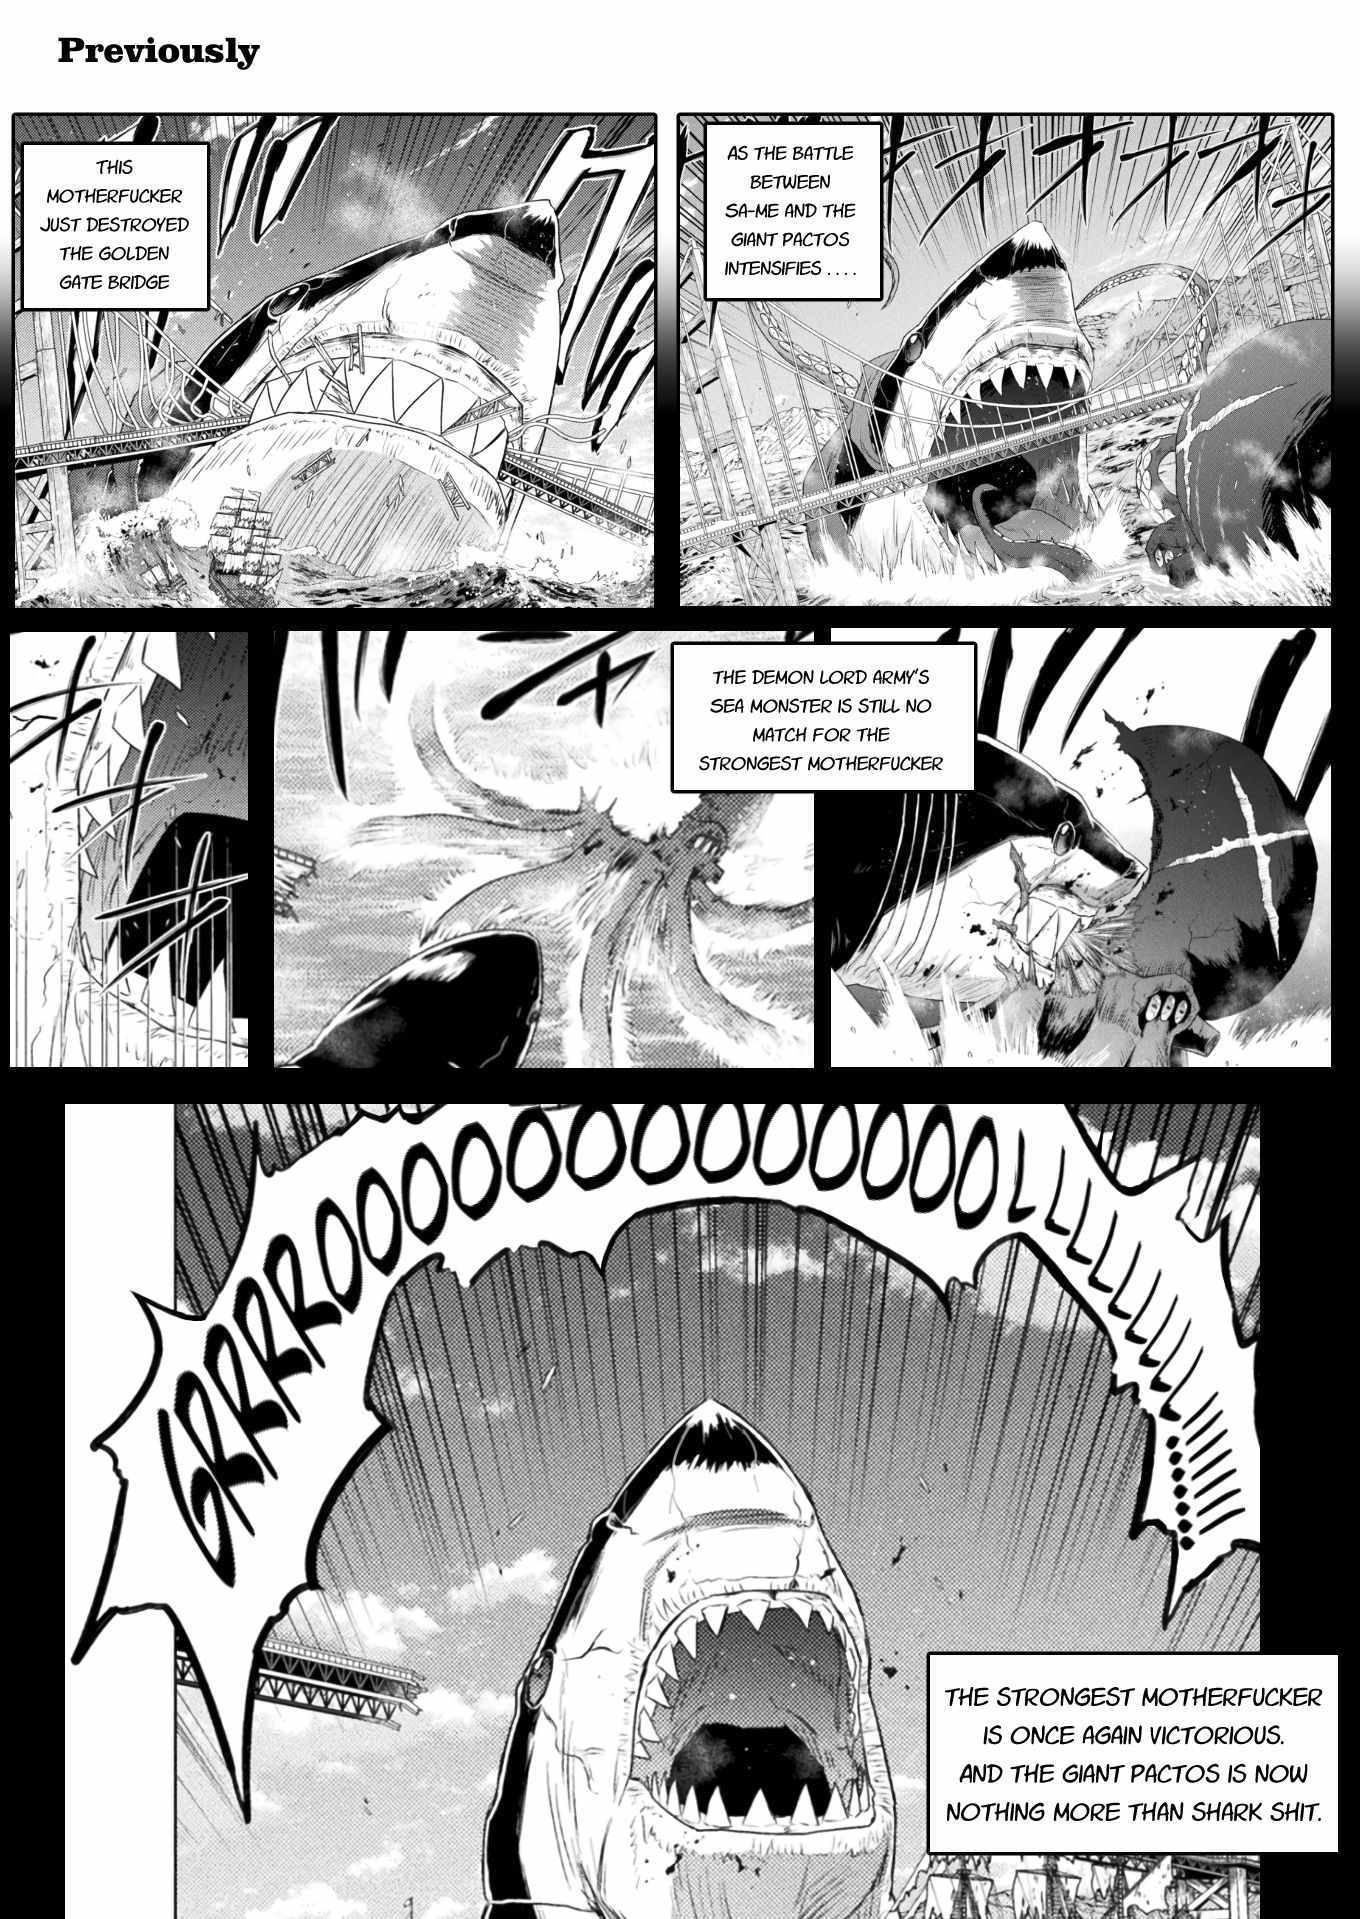 Killer Shark In Another World - 13 page 2